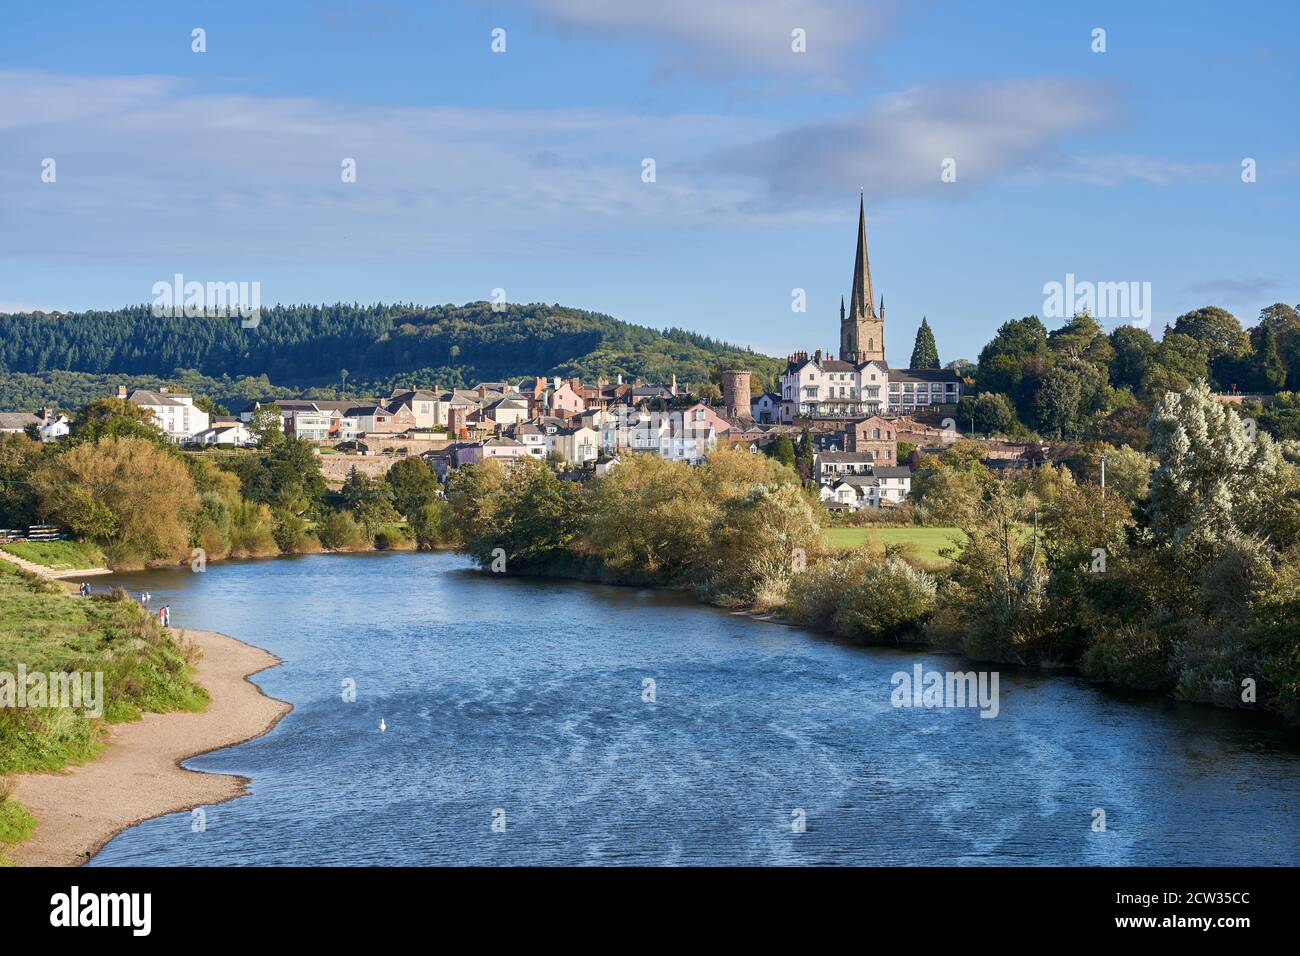 Ross-on-Wye, an English market town in Herefordshire on the Welsh border. Stock Photo